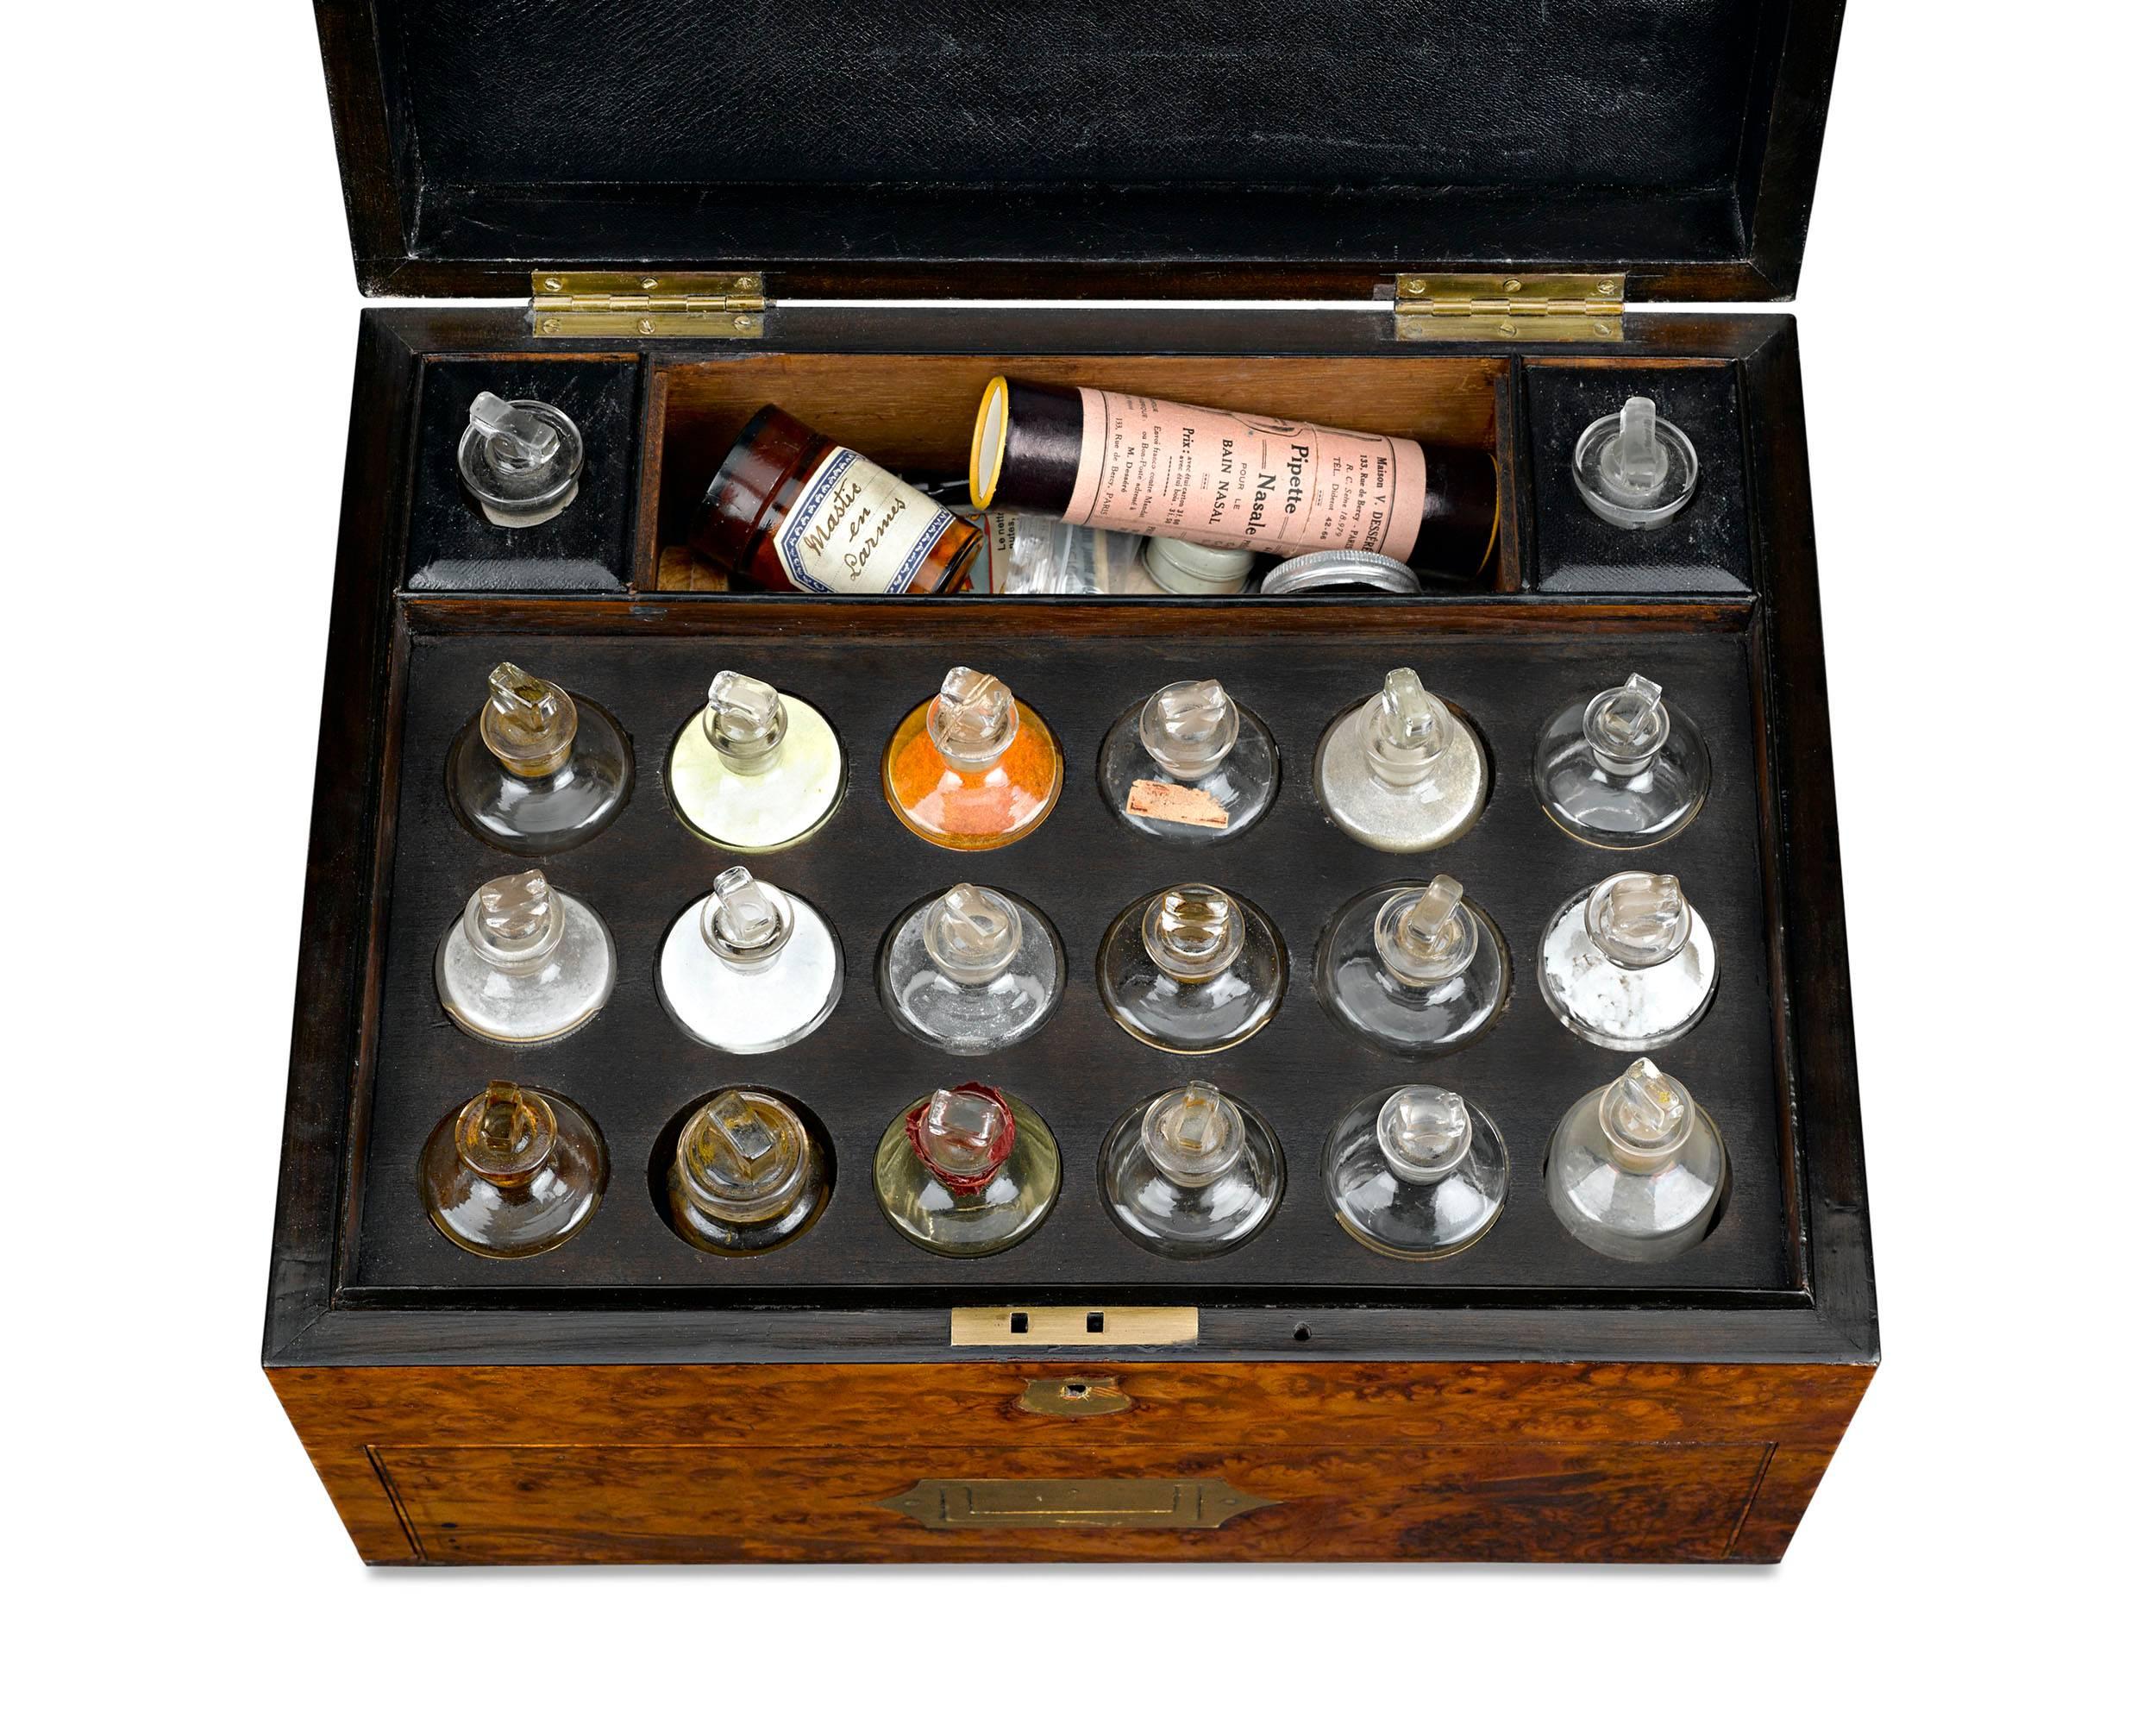 An invaluable addition to the 19th century home, this domestic medicine chest contained nearly everything needed to nurse a member of the household back to health. Made by the firm of Thomas Thompson and S. J. Capper, homeopathic chemists of